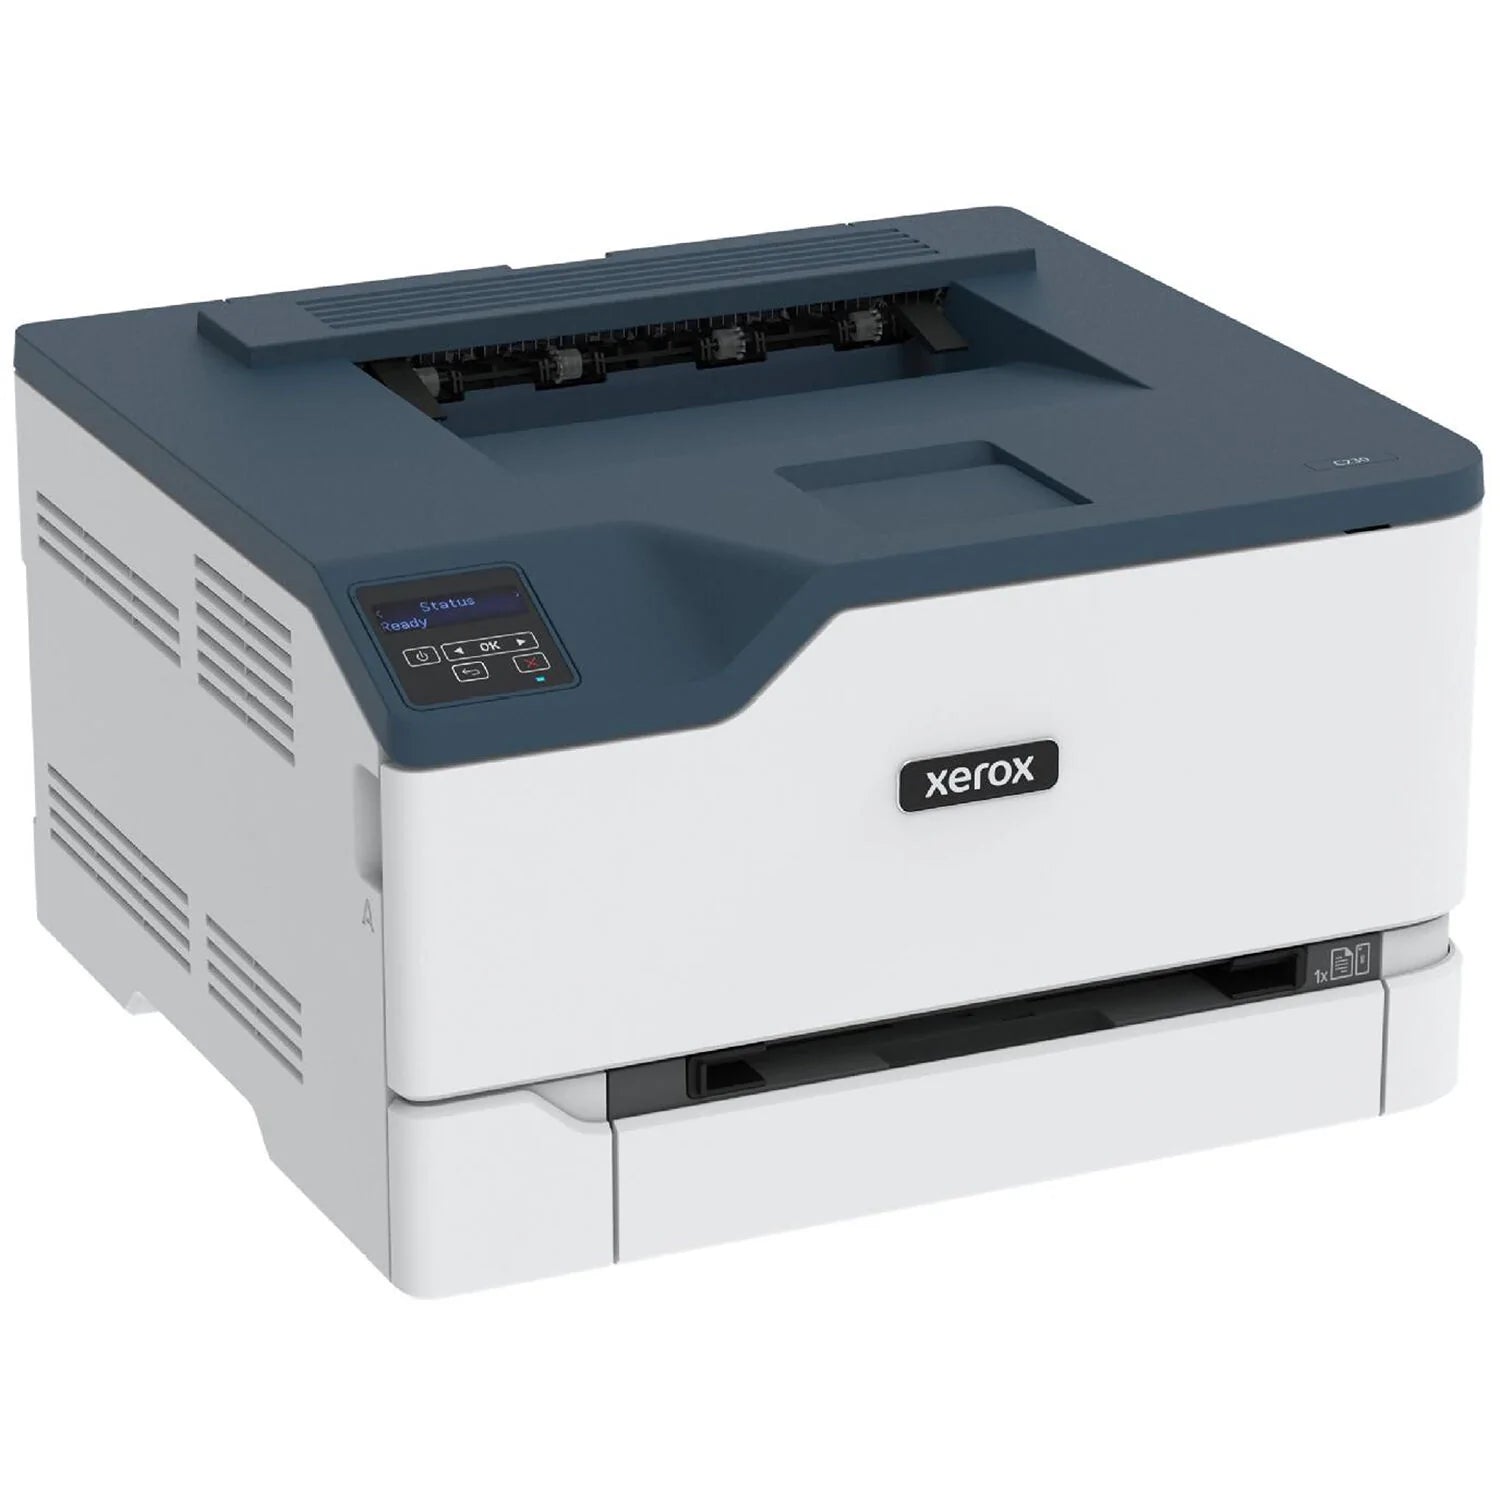 Xerox C230/DNI Color Printer, Laser, Wireless Mobile Ready - Up to 24 PPM – 250 Sheets Paper Capacity, High-Resolution Image Quality